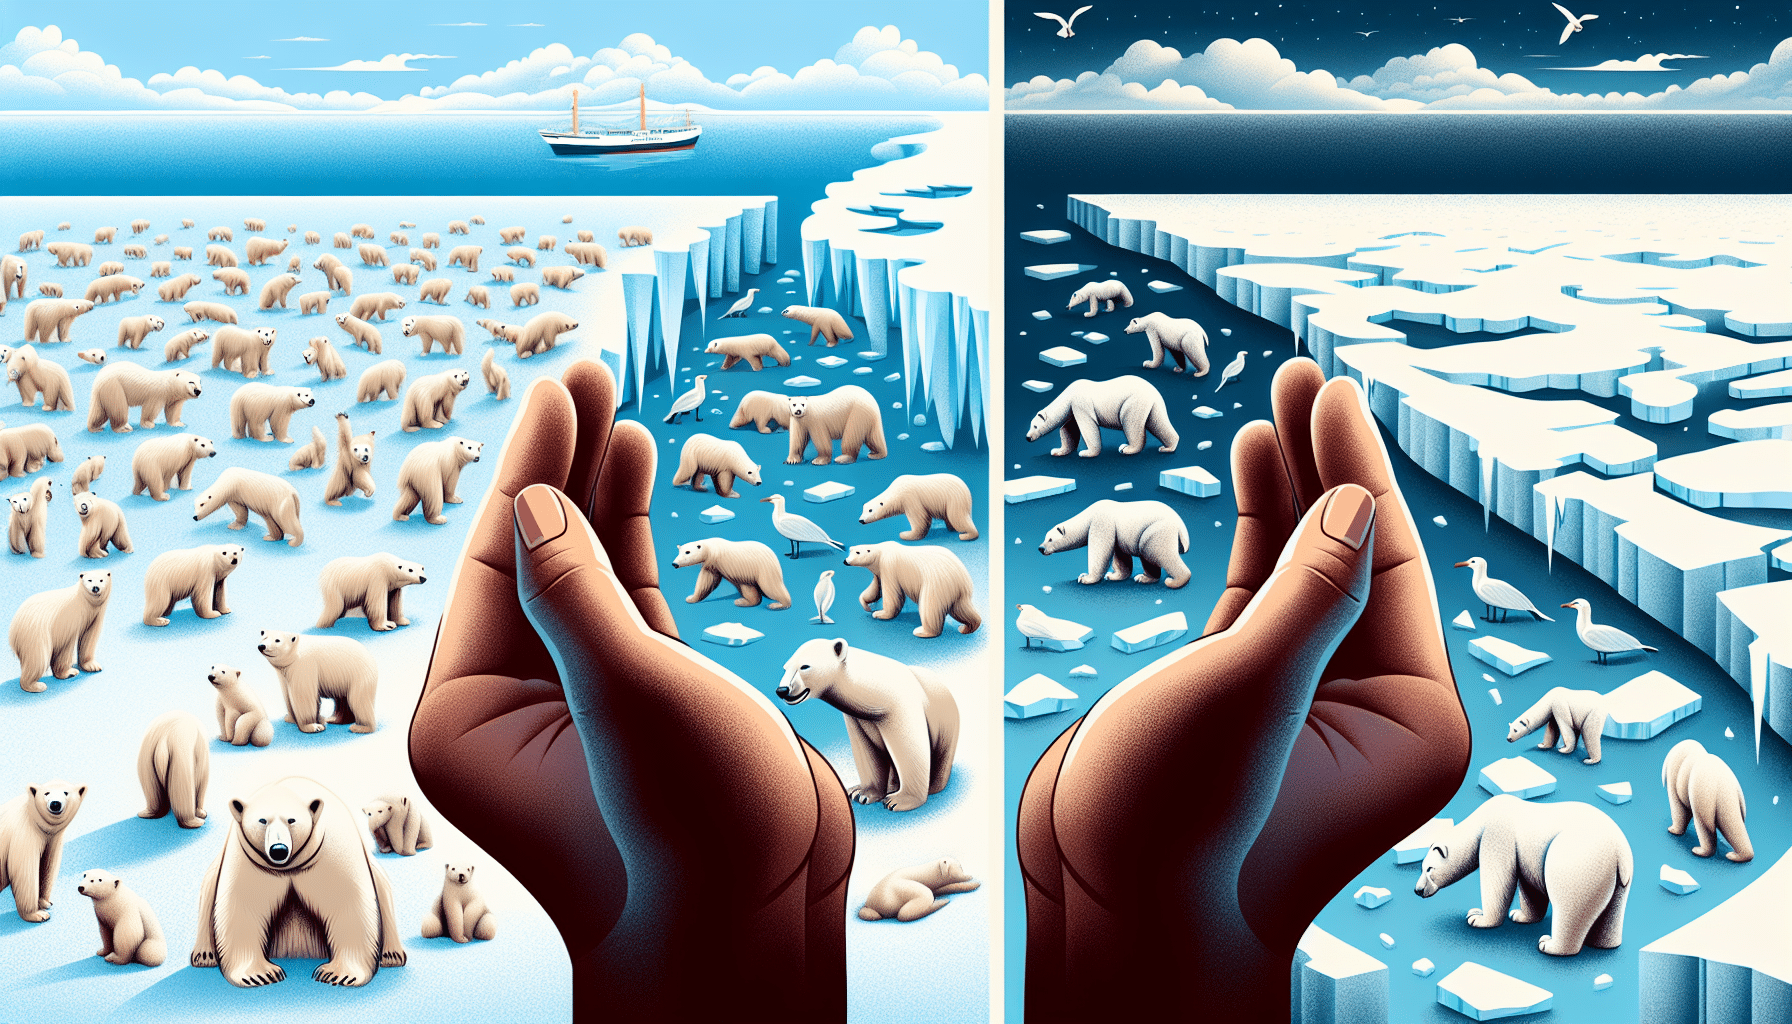 An illustration that depicts the plight and work to save the polar bear population. Show a multitude of polar bears in their natural habitat of the Arctic with gleaming snow and icebergs, frolicking and playing. Show a clear contrast in another area of the image, displaying an empty ice field, representing the falling population of polar bears. In between these two scenes, portray a symbolic pair of hands reaching out towards both scenes. These hands symbolize the efforts to repopulate the polar bear species. Make sure to not include any text, brand names, logos or human characters within the image.